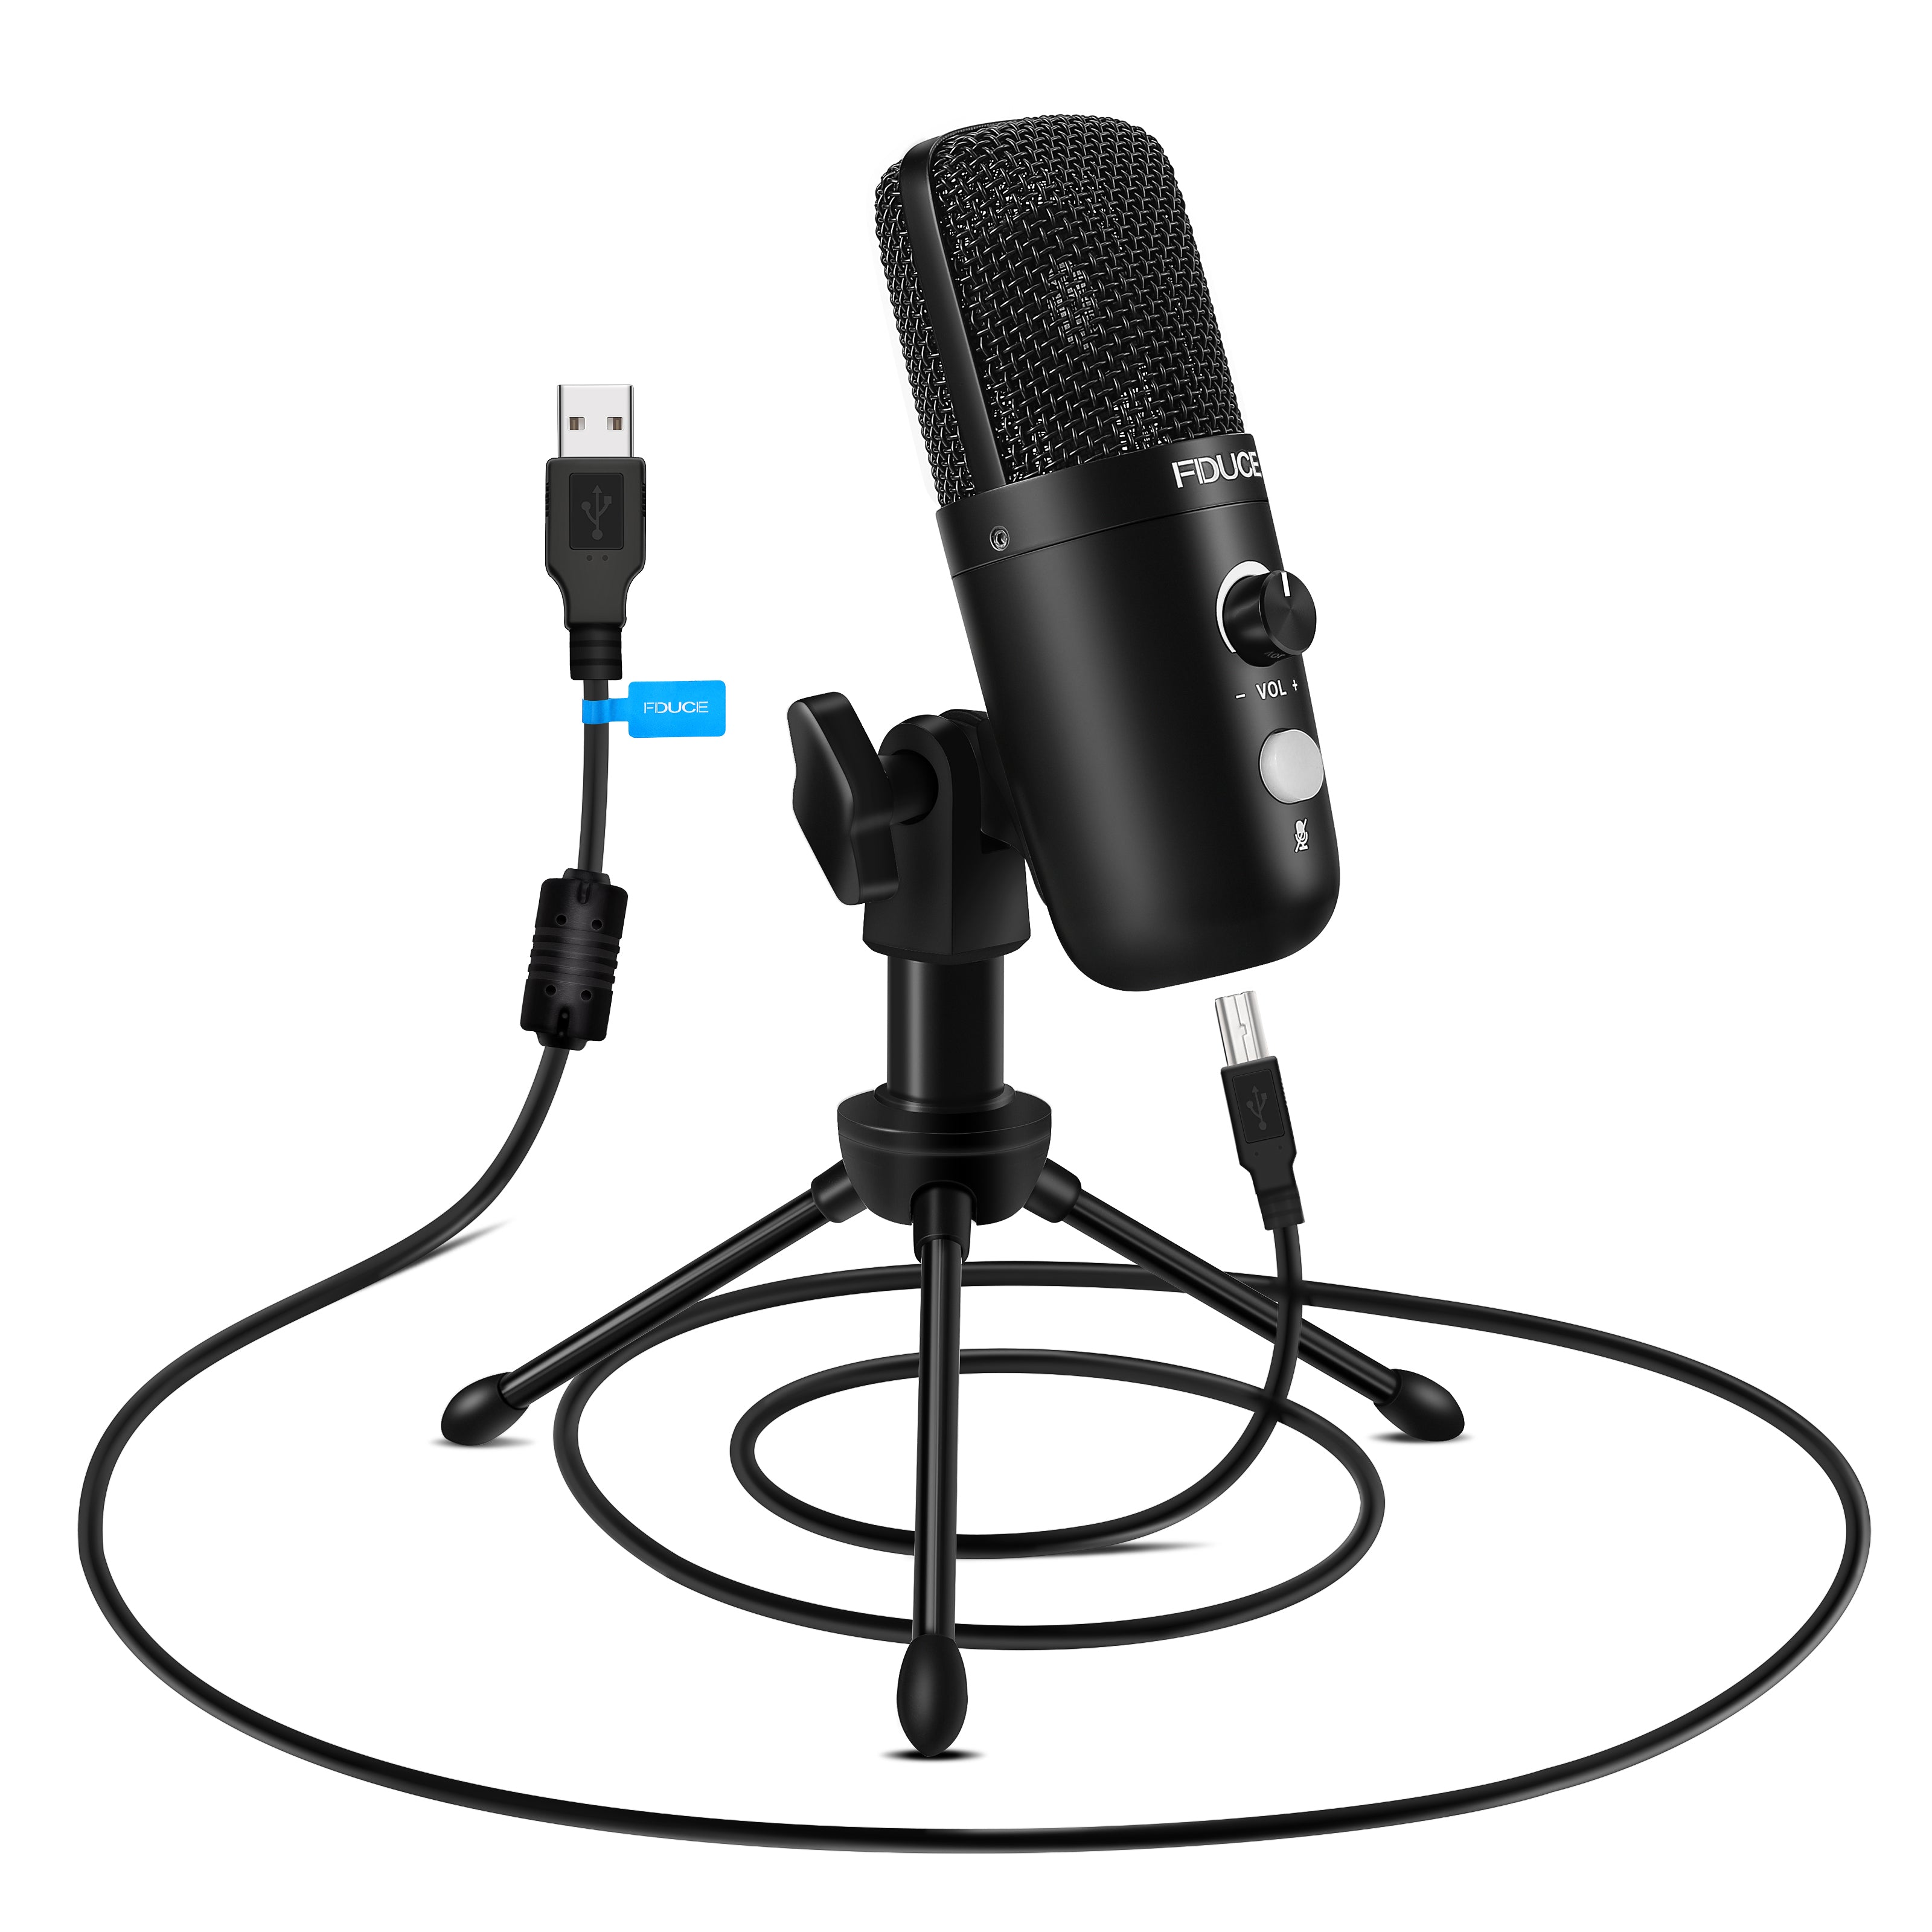 LNKOO USB Plug&Play Condenser Microphone, FDUCE Professional Studio PC Mic  with Tripod for Gaming, Streaming, Podcast, Chatting,  on Mac 